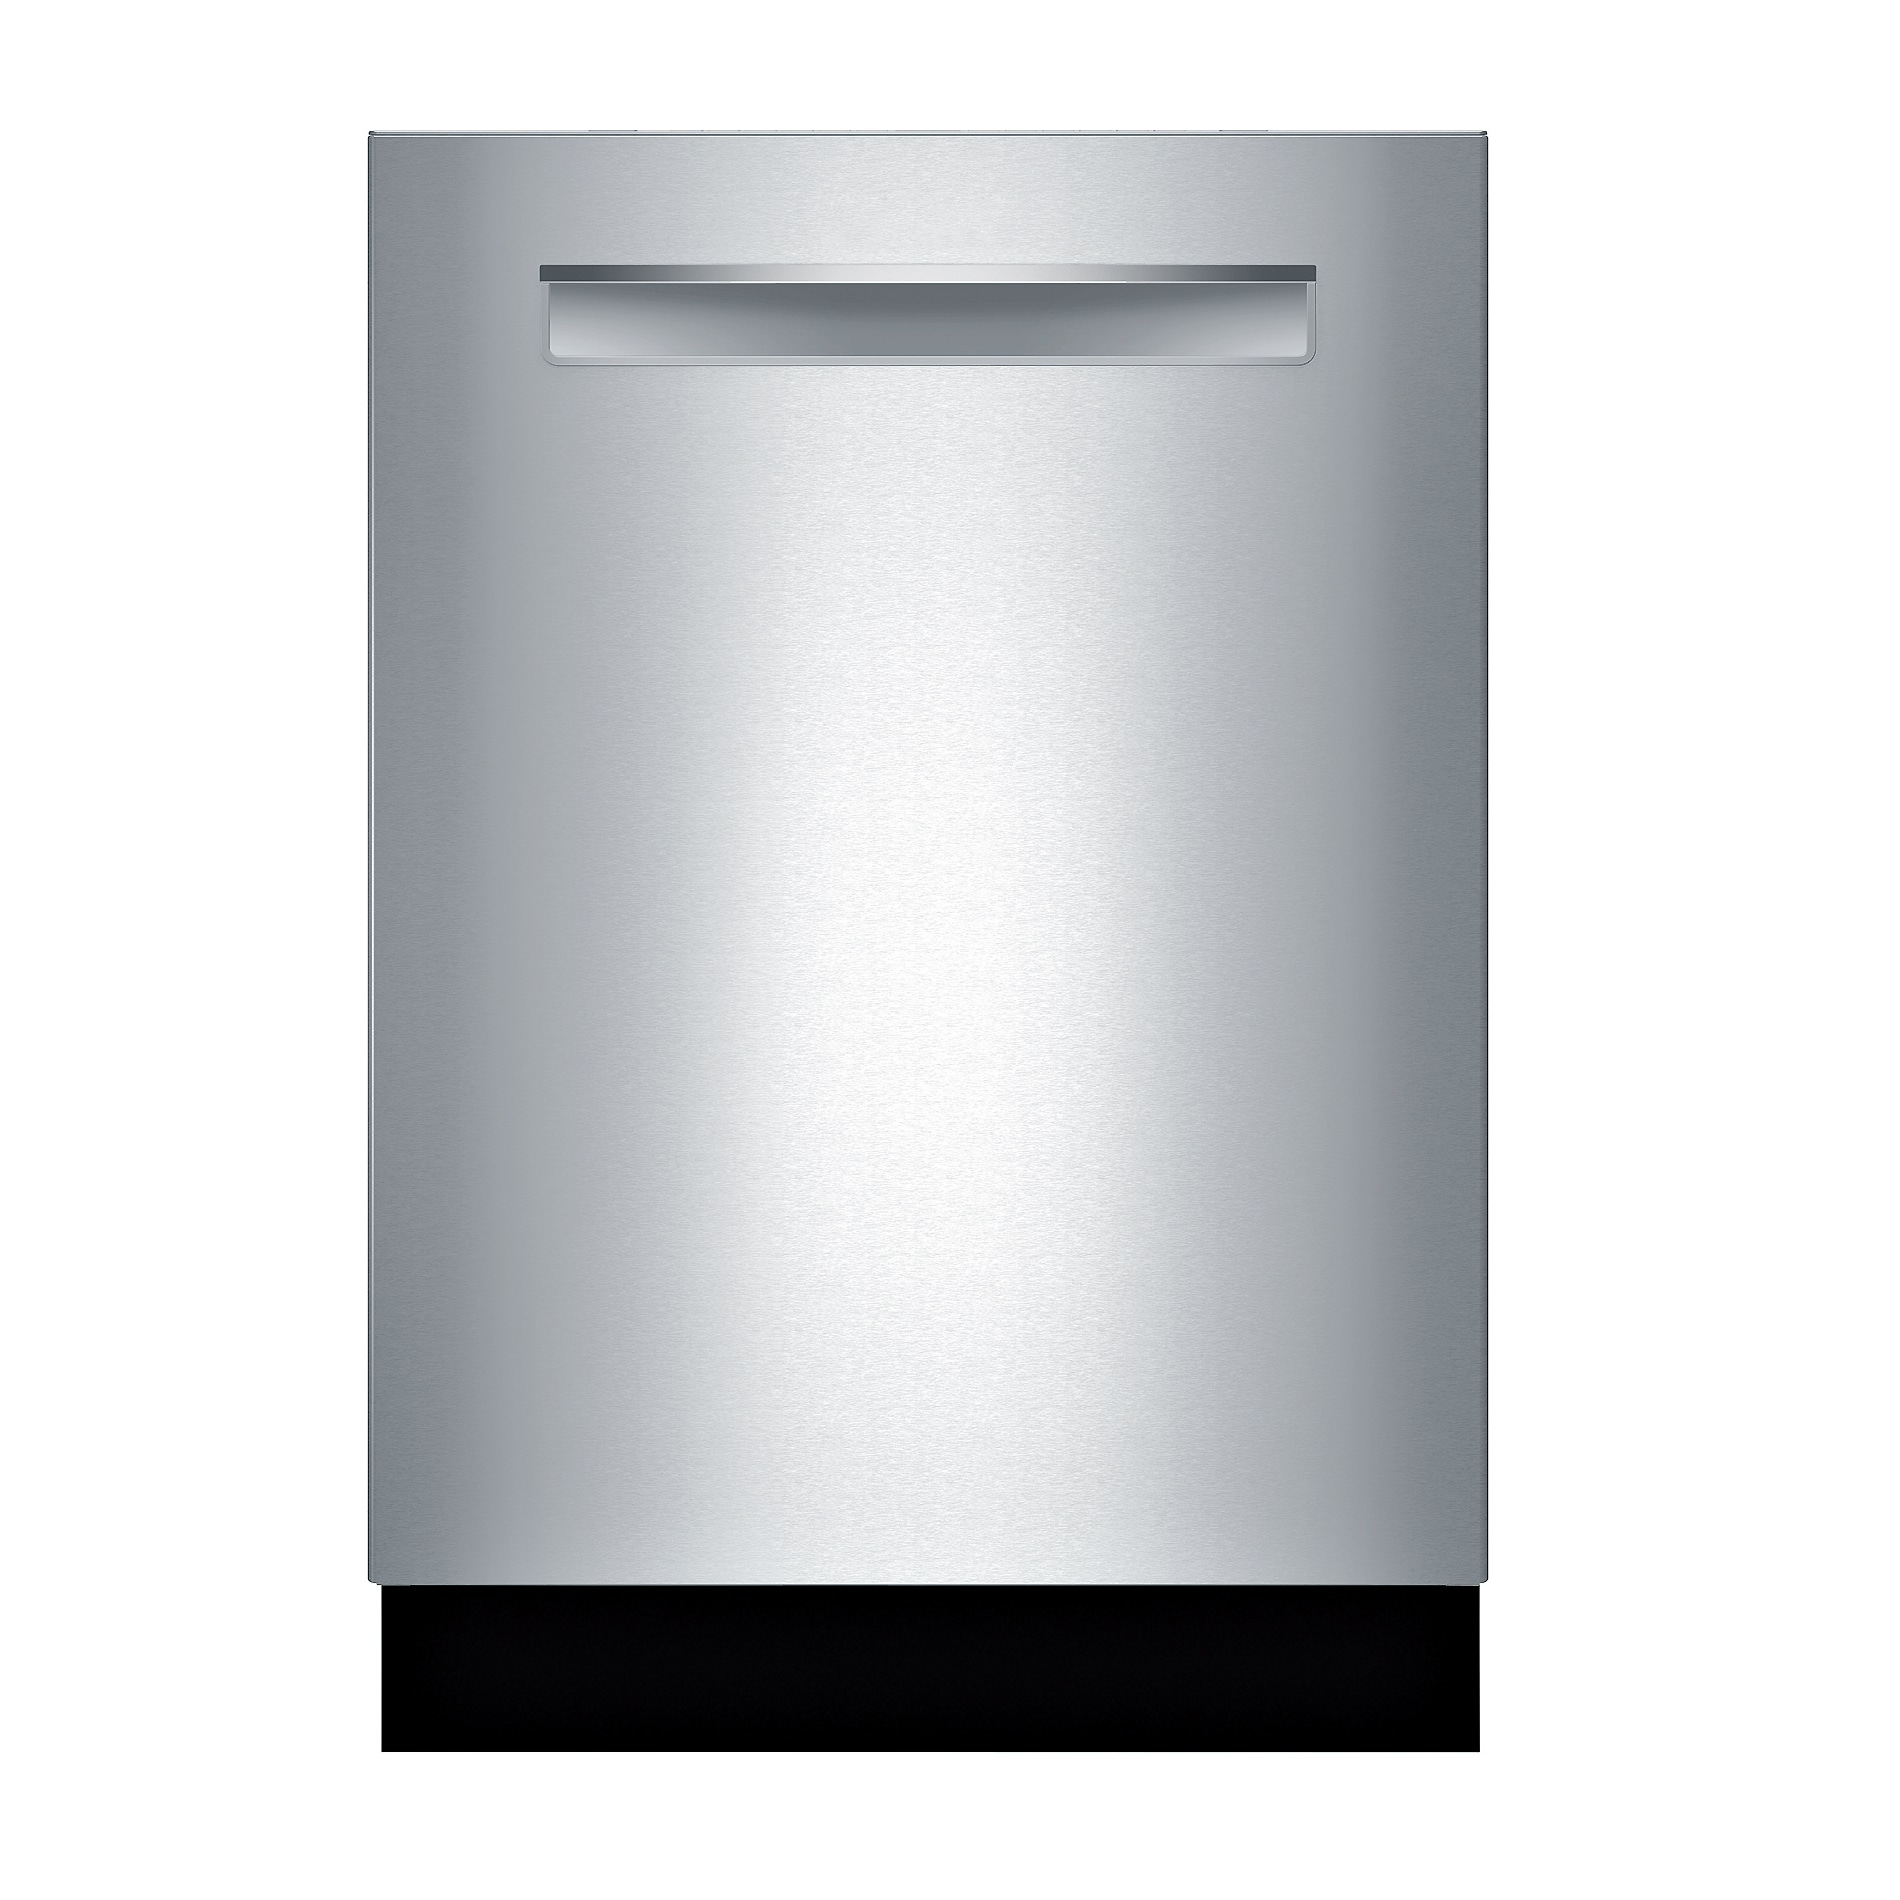 Sjah Ter ere van Guinness Bosch 500 Series Top Control 24-in Built-In Dishwasher (Stainless Steel)  ENERGY STAR, 44-dBA in the Built-In Dishwashers department at Lowes.com